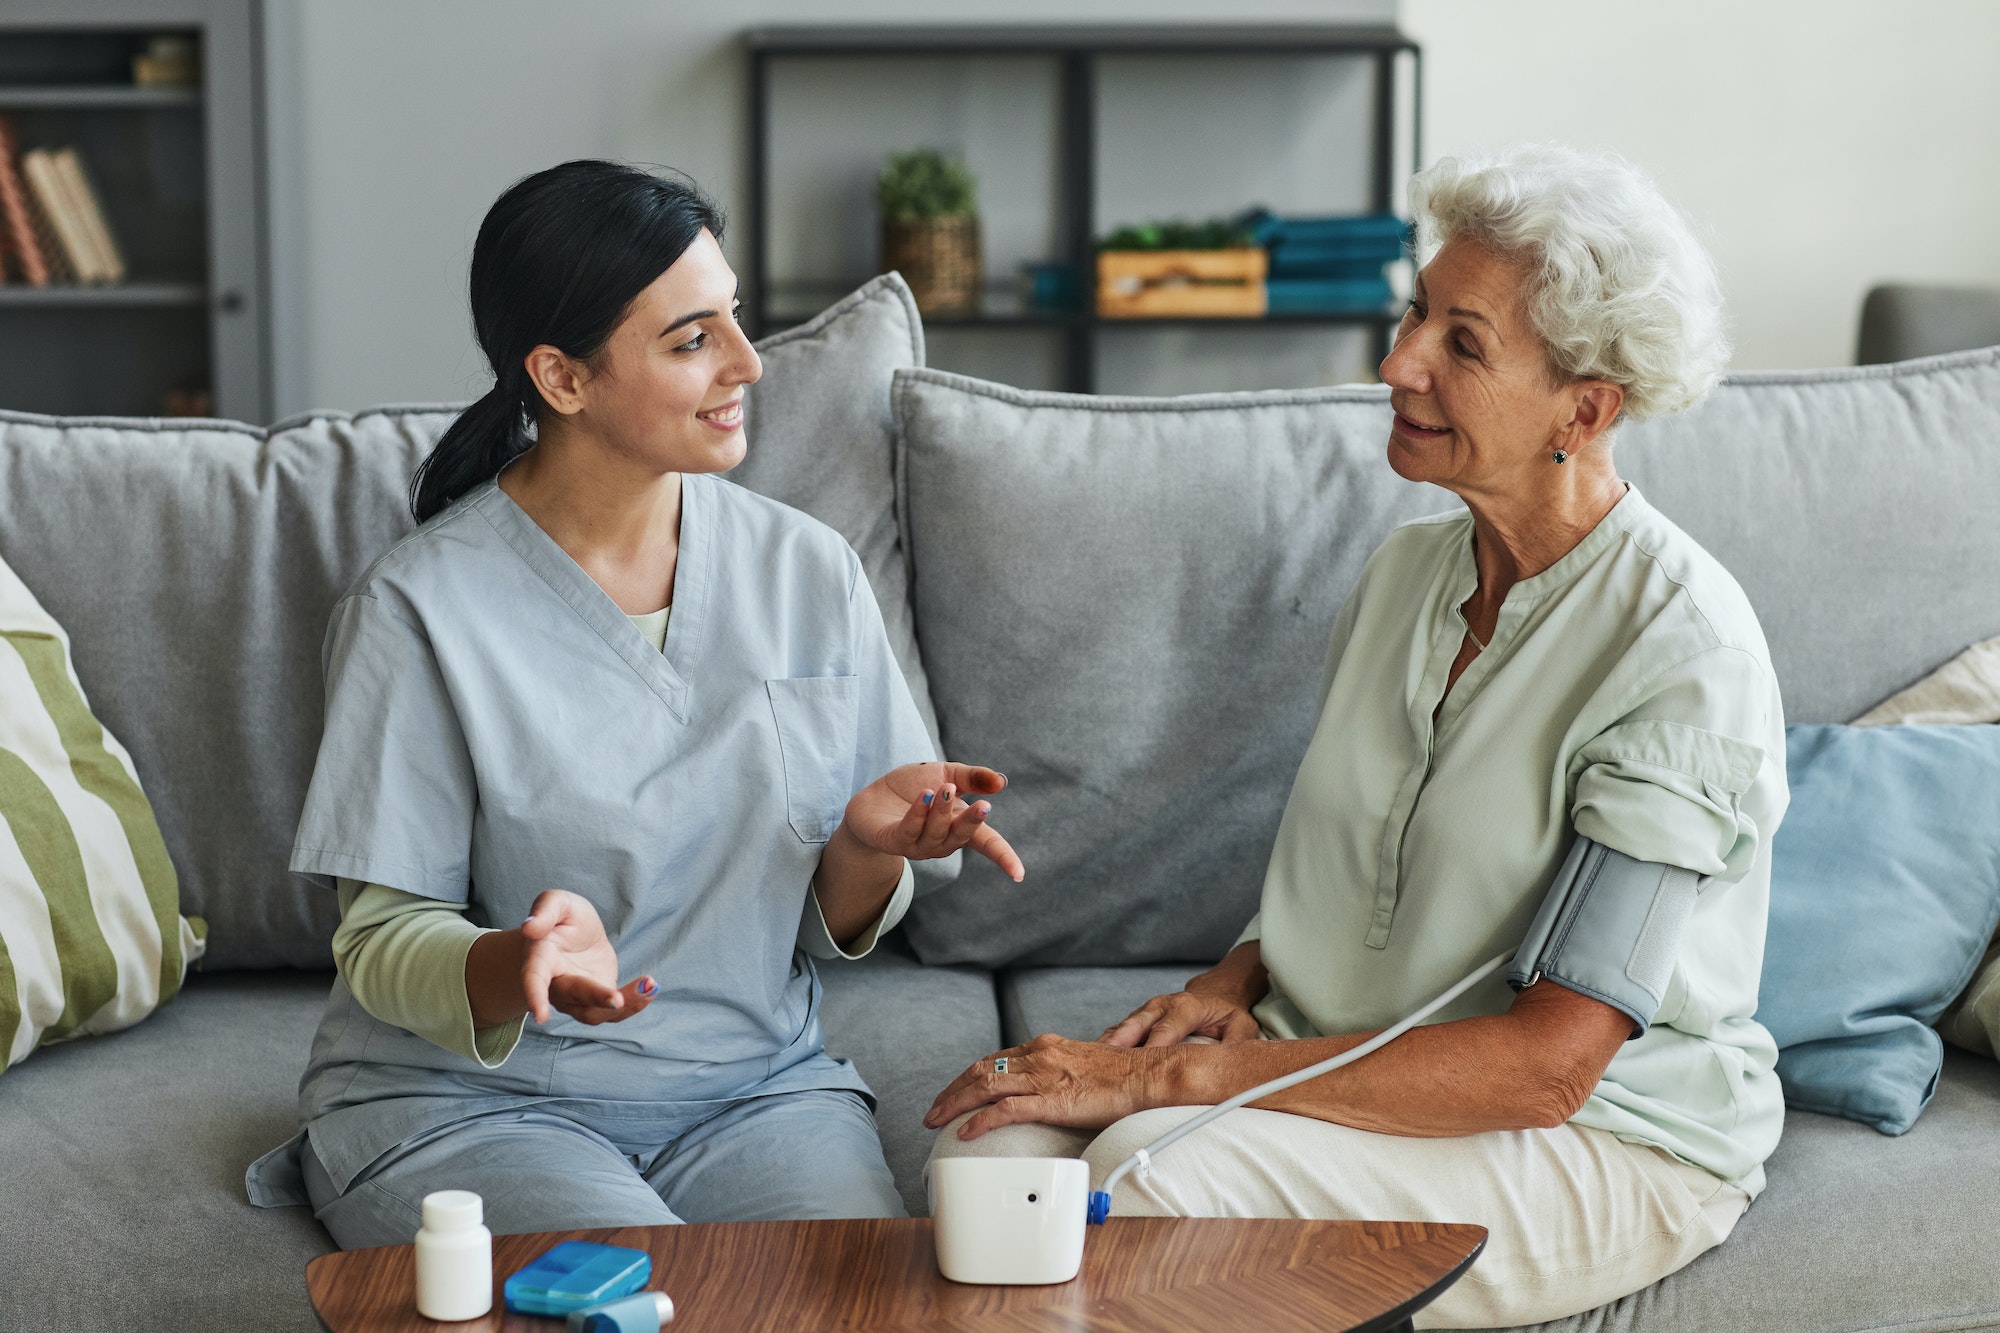 young-nurse-talking-to-senior-woman-in-retirement-home.jpg